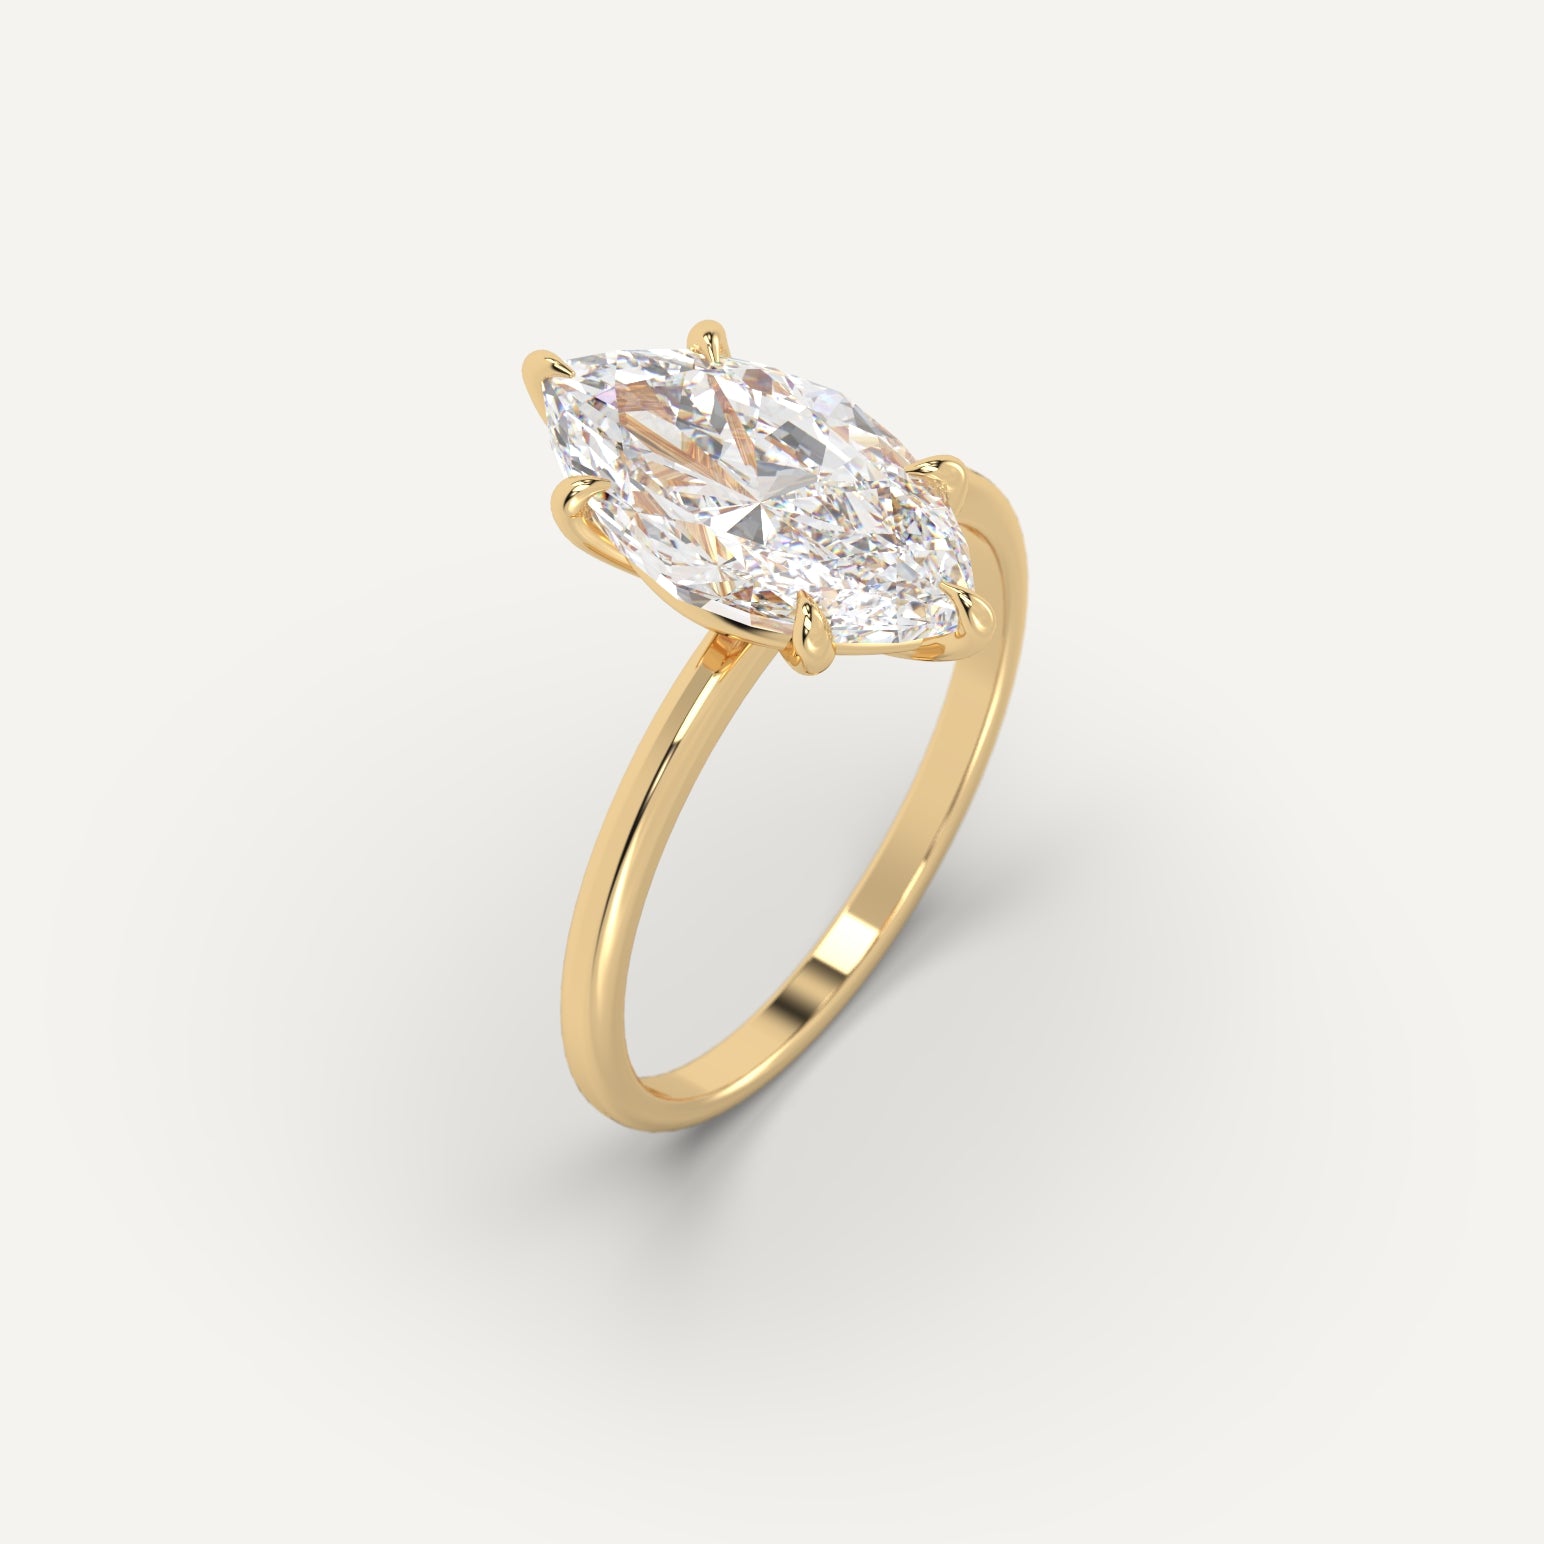 4 carat Marquise Cut Engagement Ring in 14k Yellow Gold